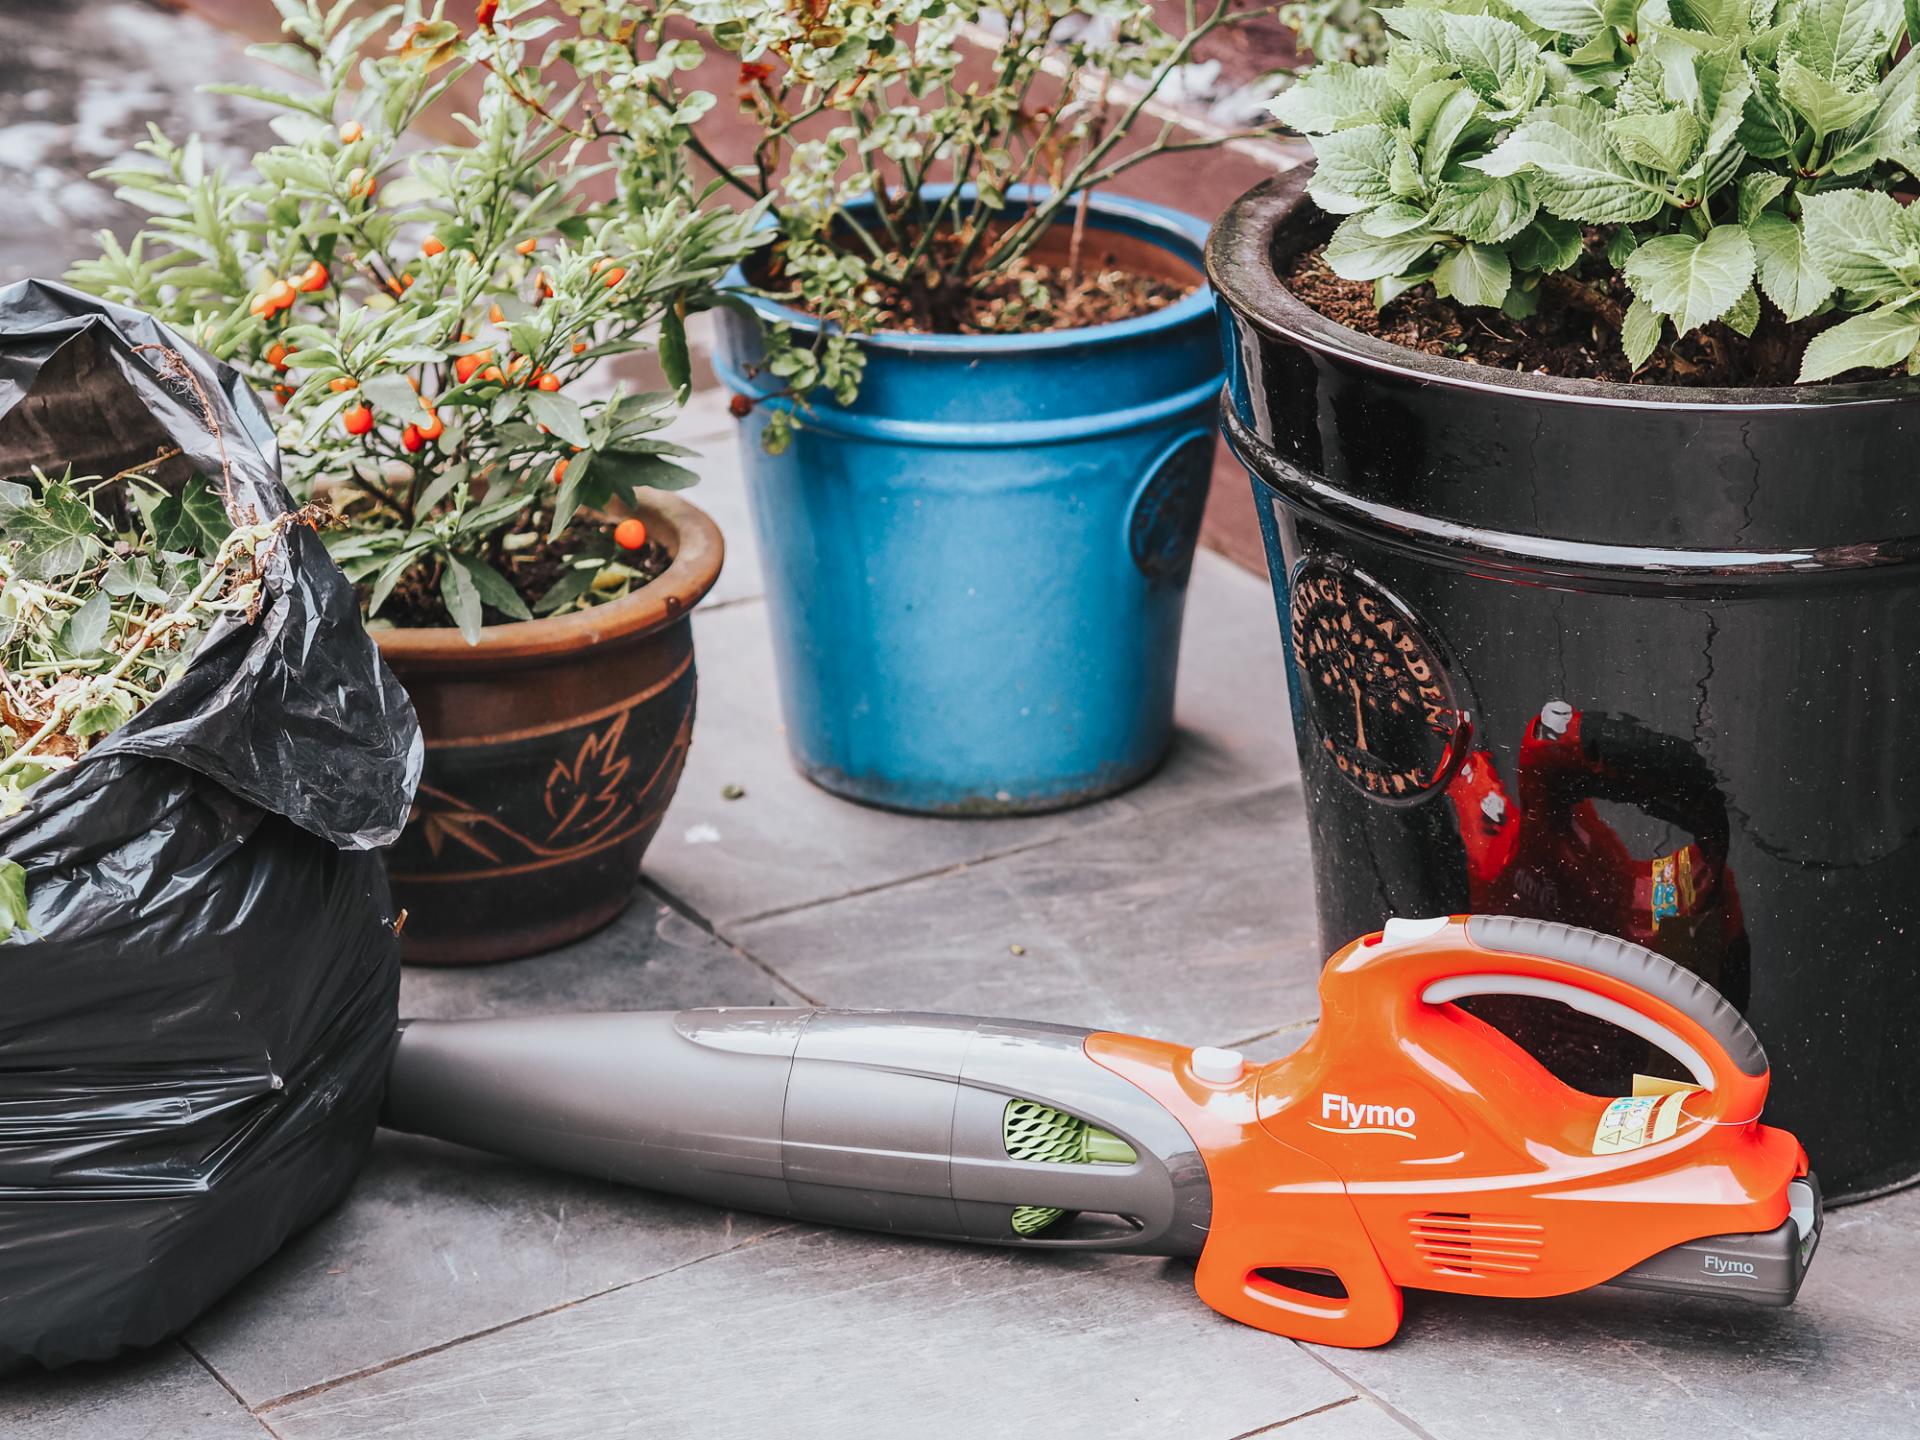 Flymo leaf blower review from blogger Bunnipunch